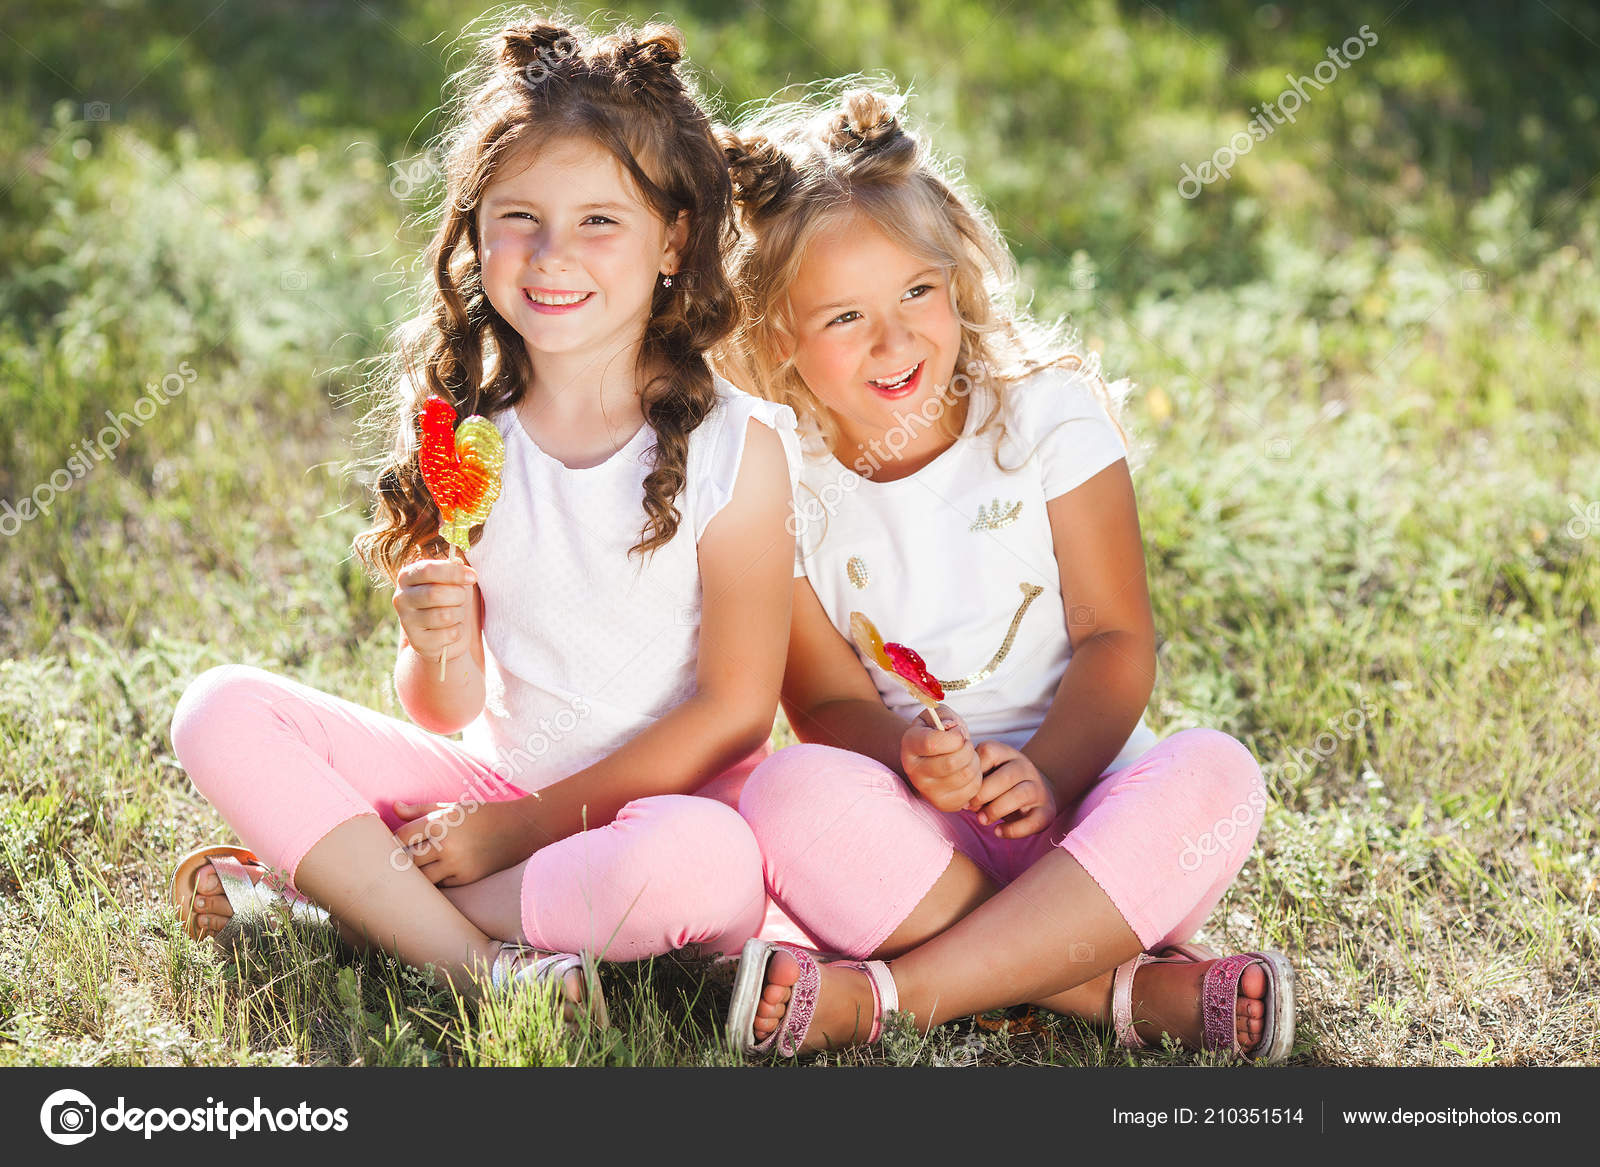 Cute Little Girls Friends Having Fun Together Outdoors Stock Photo Image By C Elenachhil